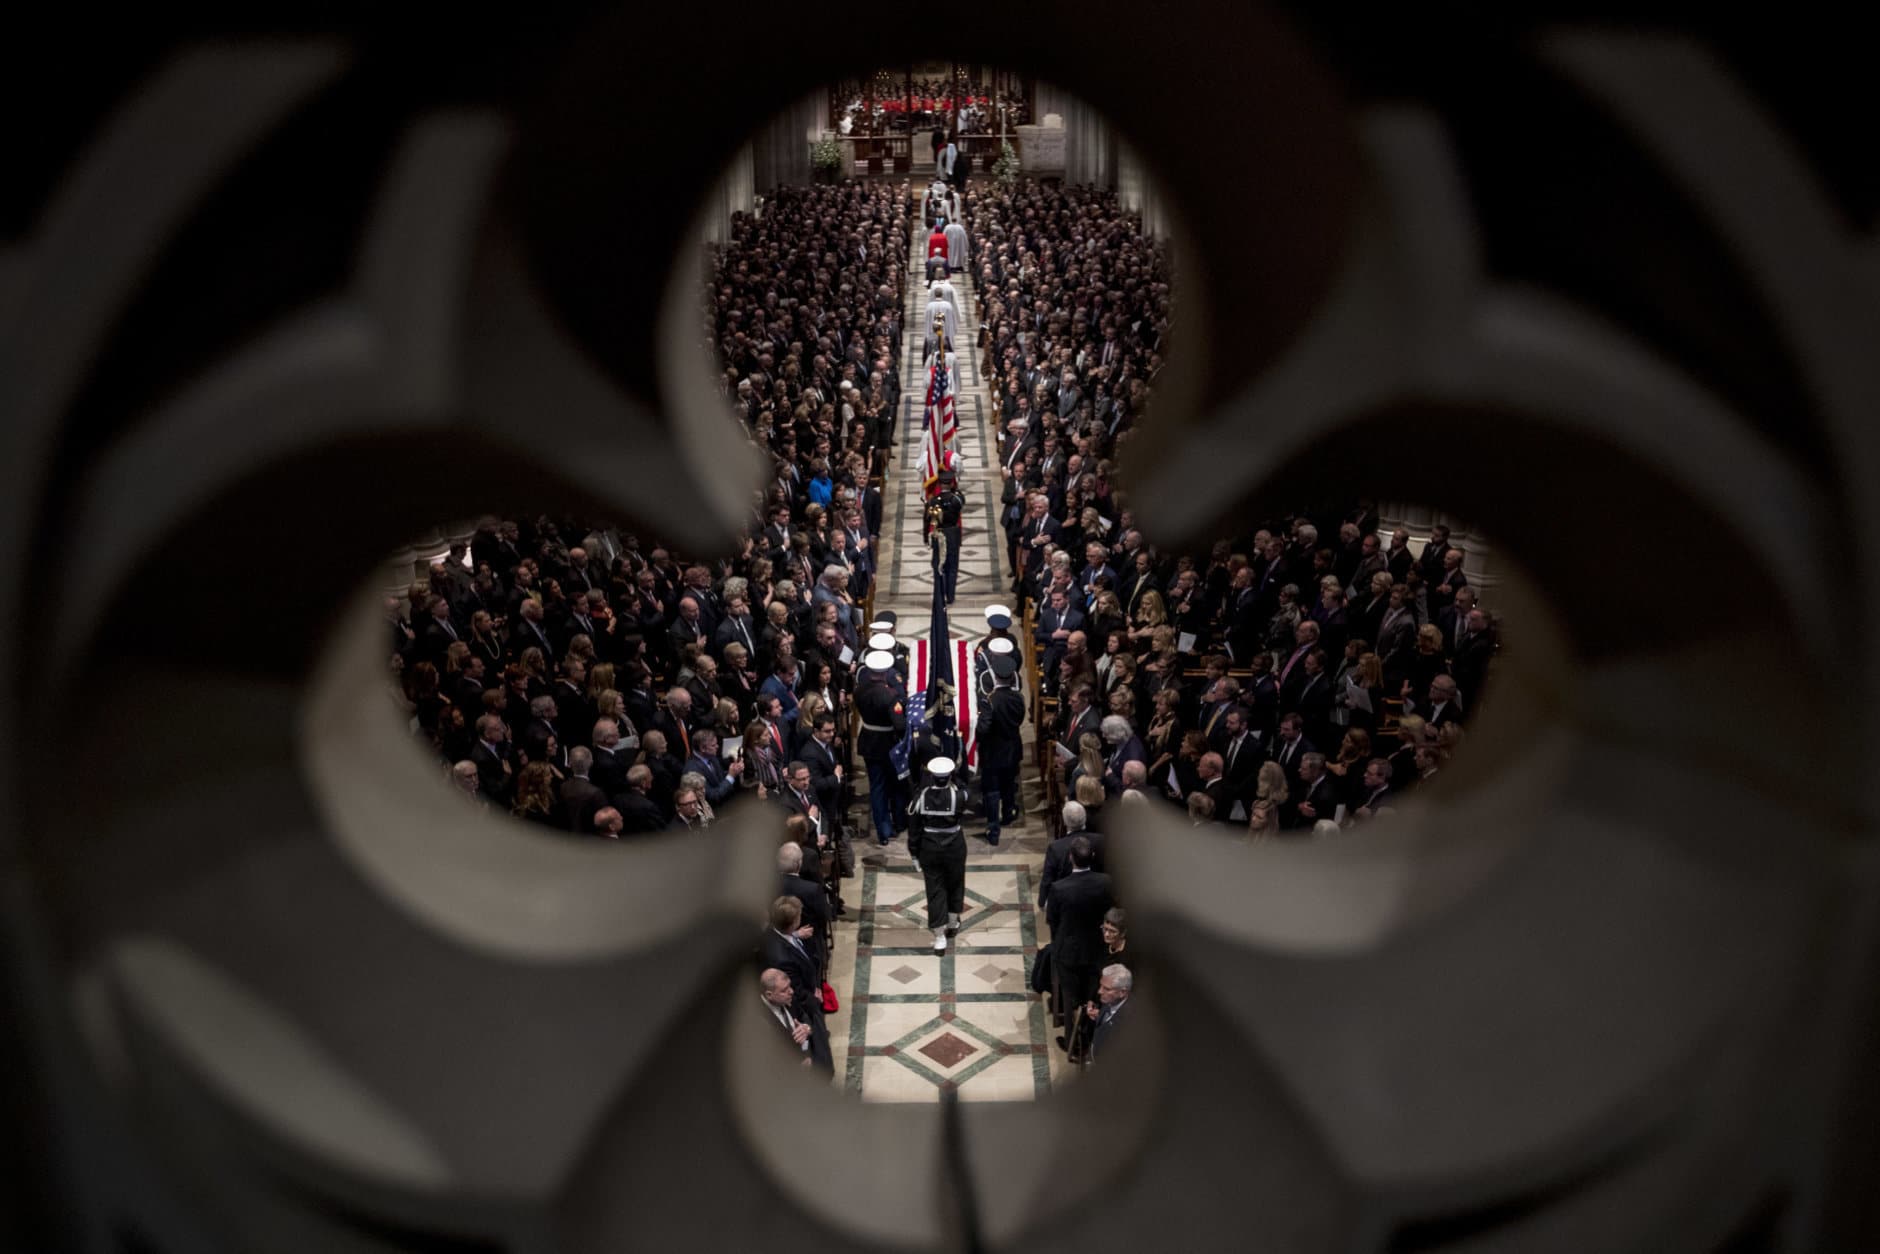 The flag-draped casket of former President George H.W. Bush is carried by a military honor guard into a State Funeral at the National Cathedral, Wednesday, Dec. 5, 2018, in Washington. (AP Photo/Andrew Harnik, Pool)